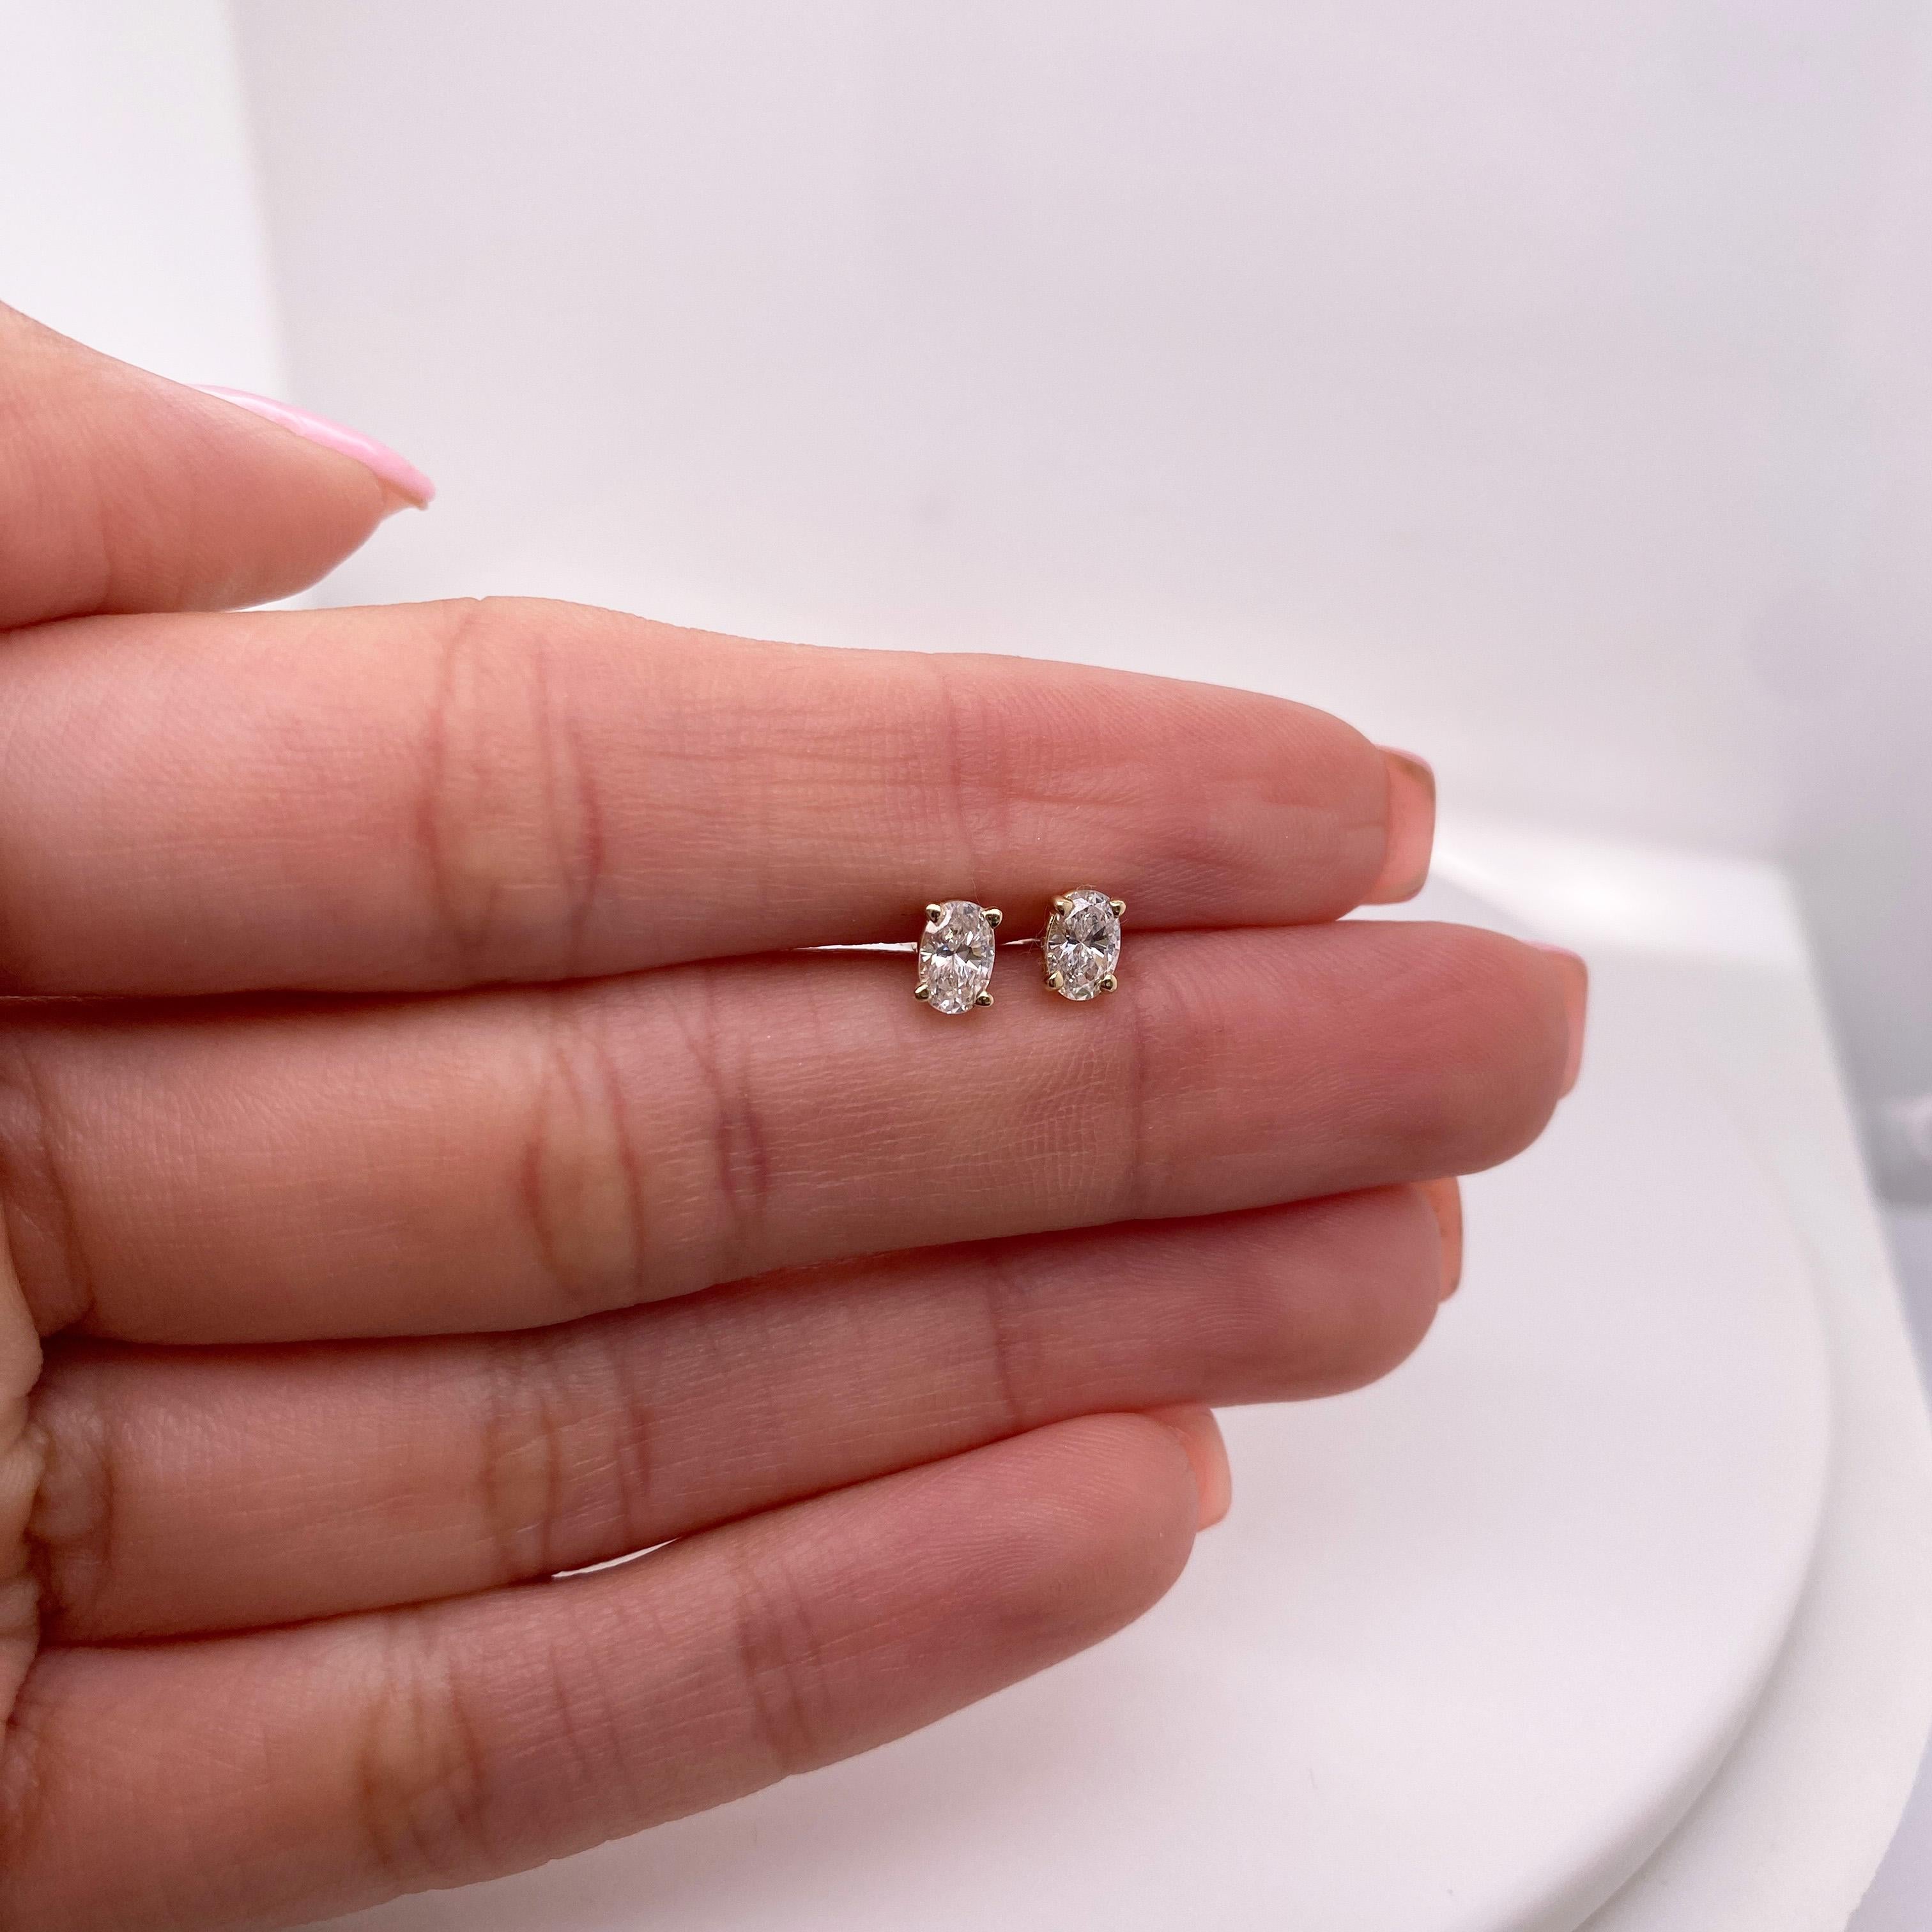 These lovely oval stud earrings are perfect for any ear, looking beautiful when worn alone or as an accent next to larger earrings! The total weight of these diamonds is 0.50 carats (or slightly more) with near-colorless G-I color and VS-SI clarity.